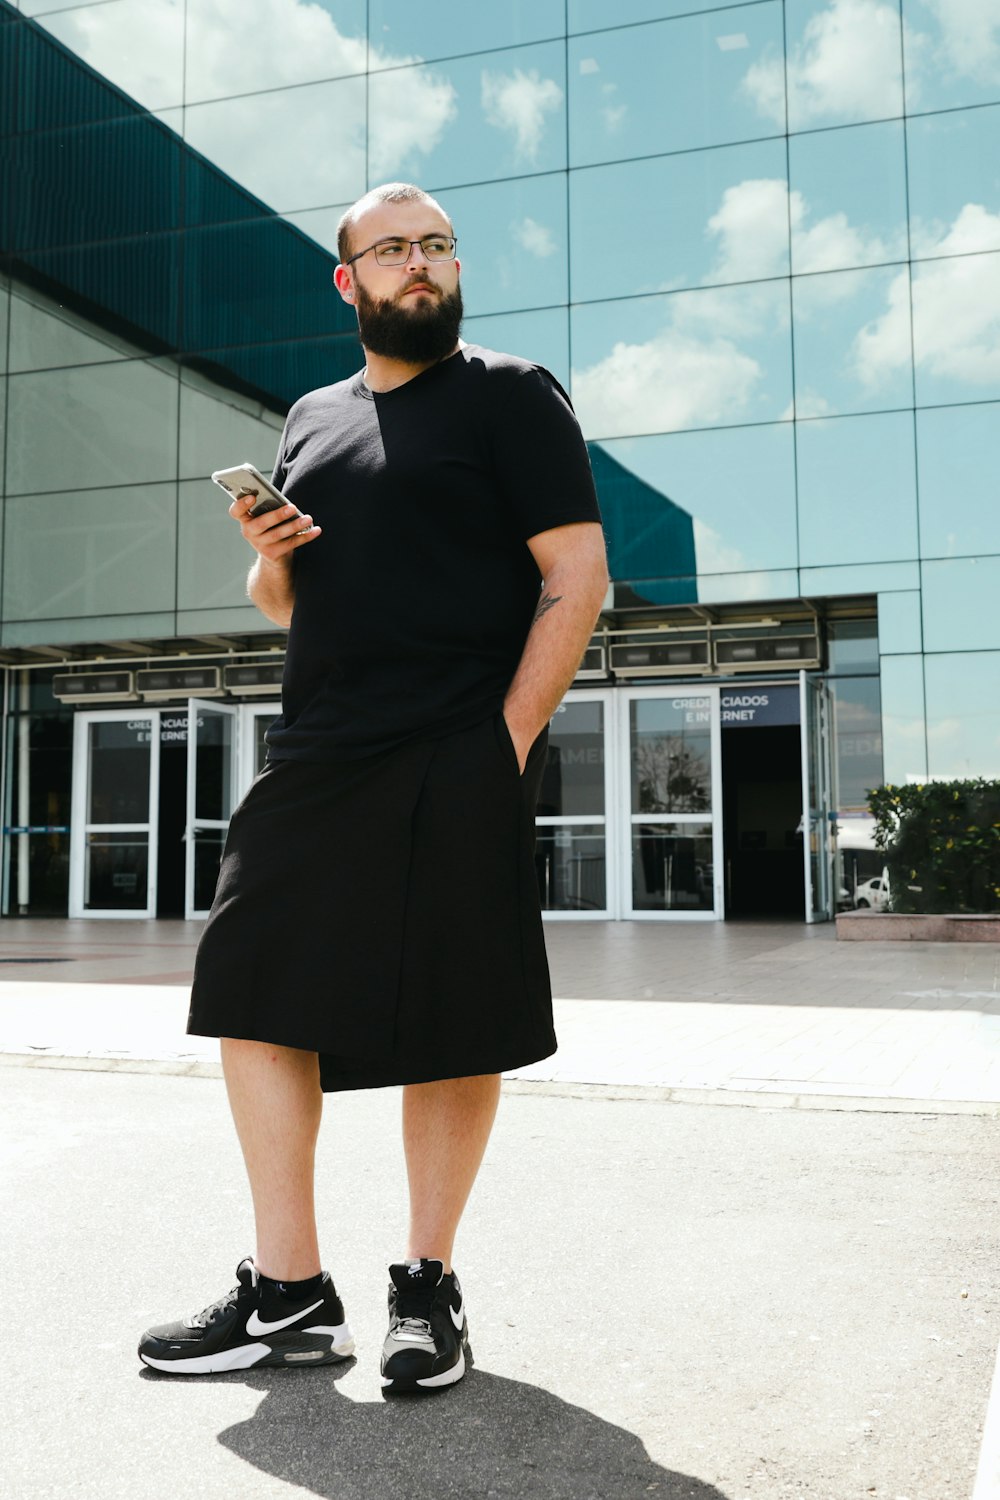 a man standing in front of a building holding a cell phone